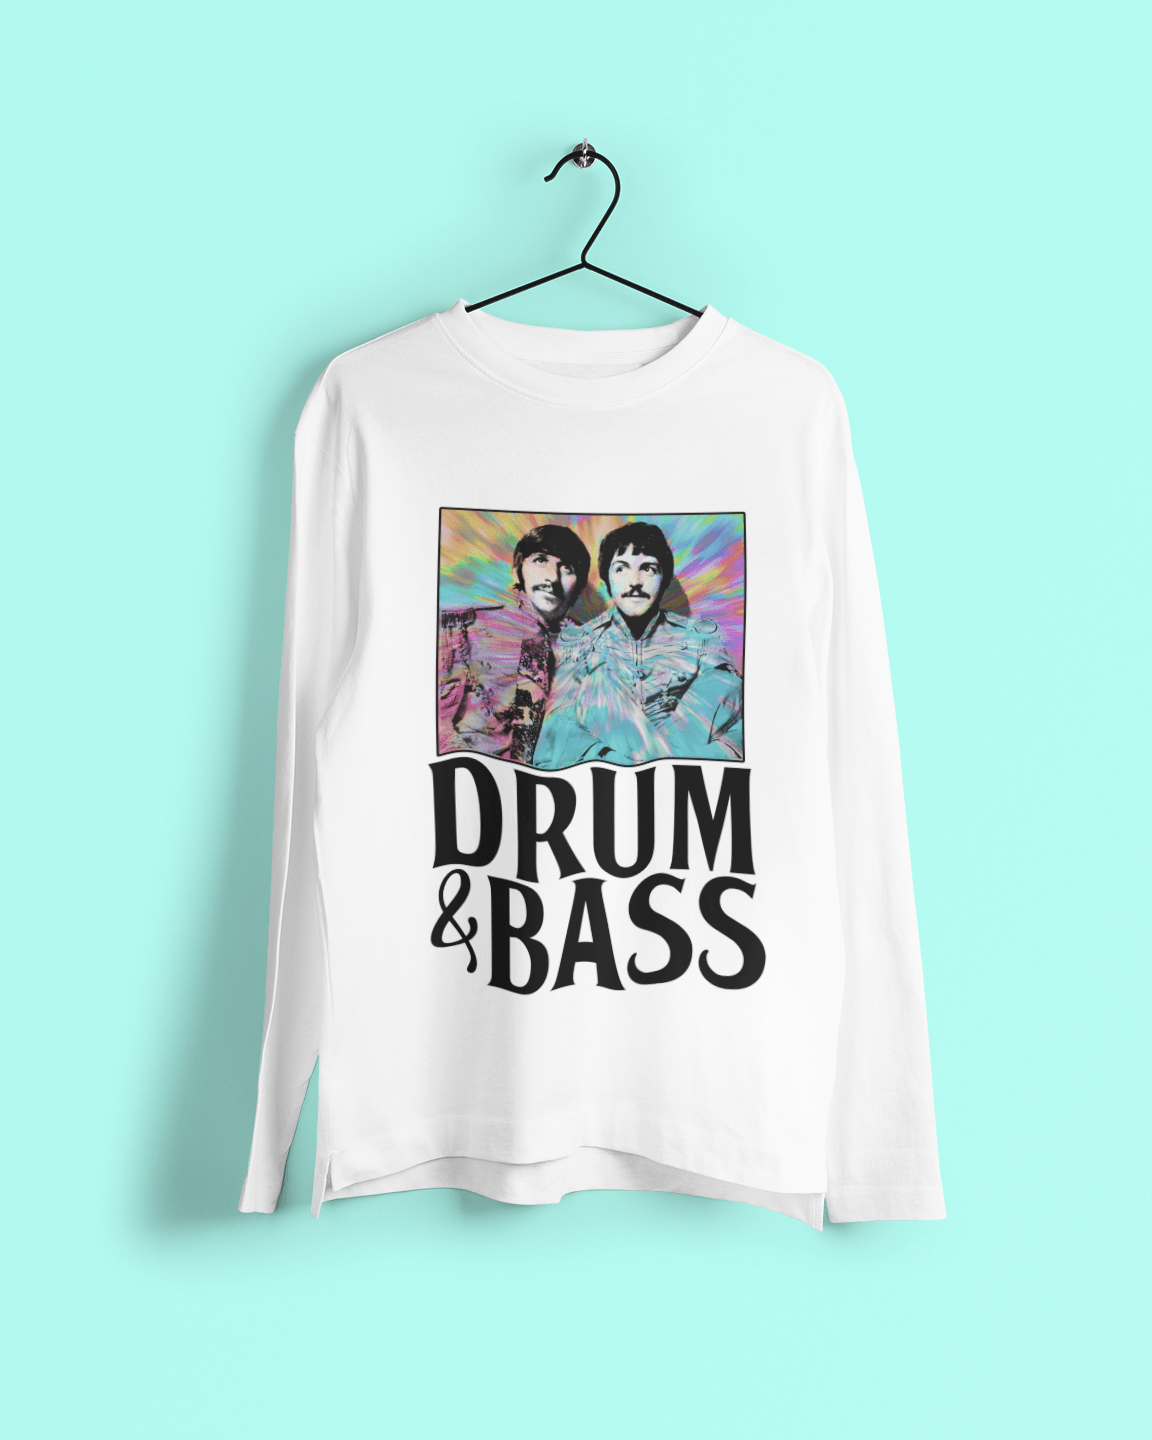 Drum and Bass, Ringo and Paul Long Sleeve T-Shirt 8Ball